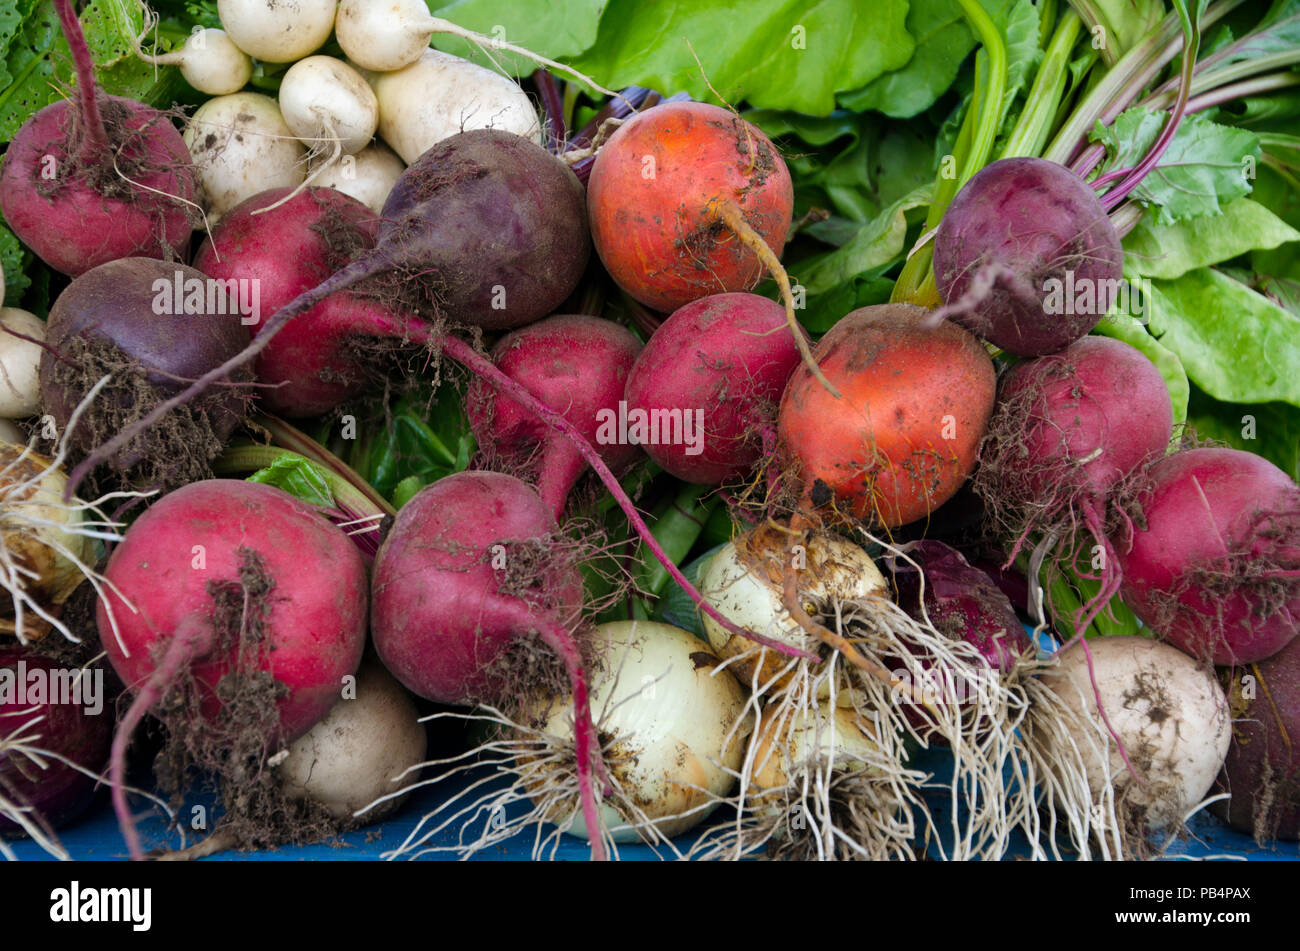 Colorful beets from Harvest, Community Garden, Maine, USA Stock Photo